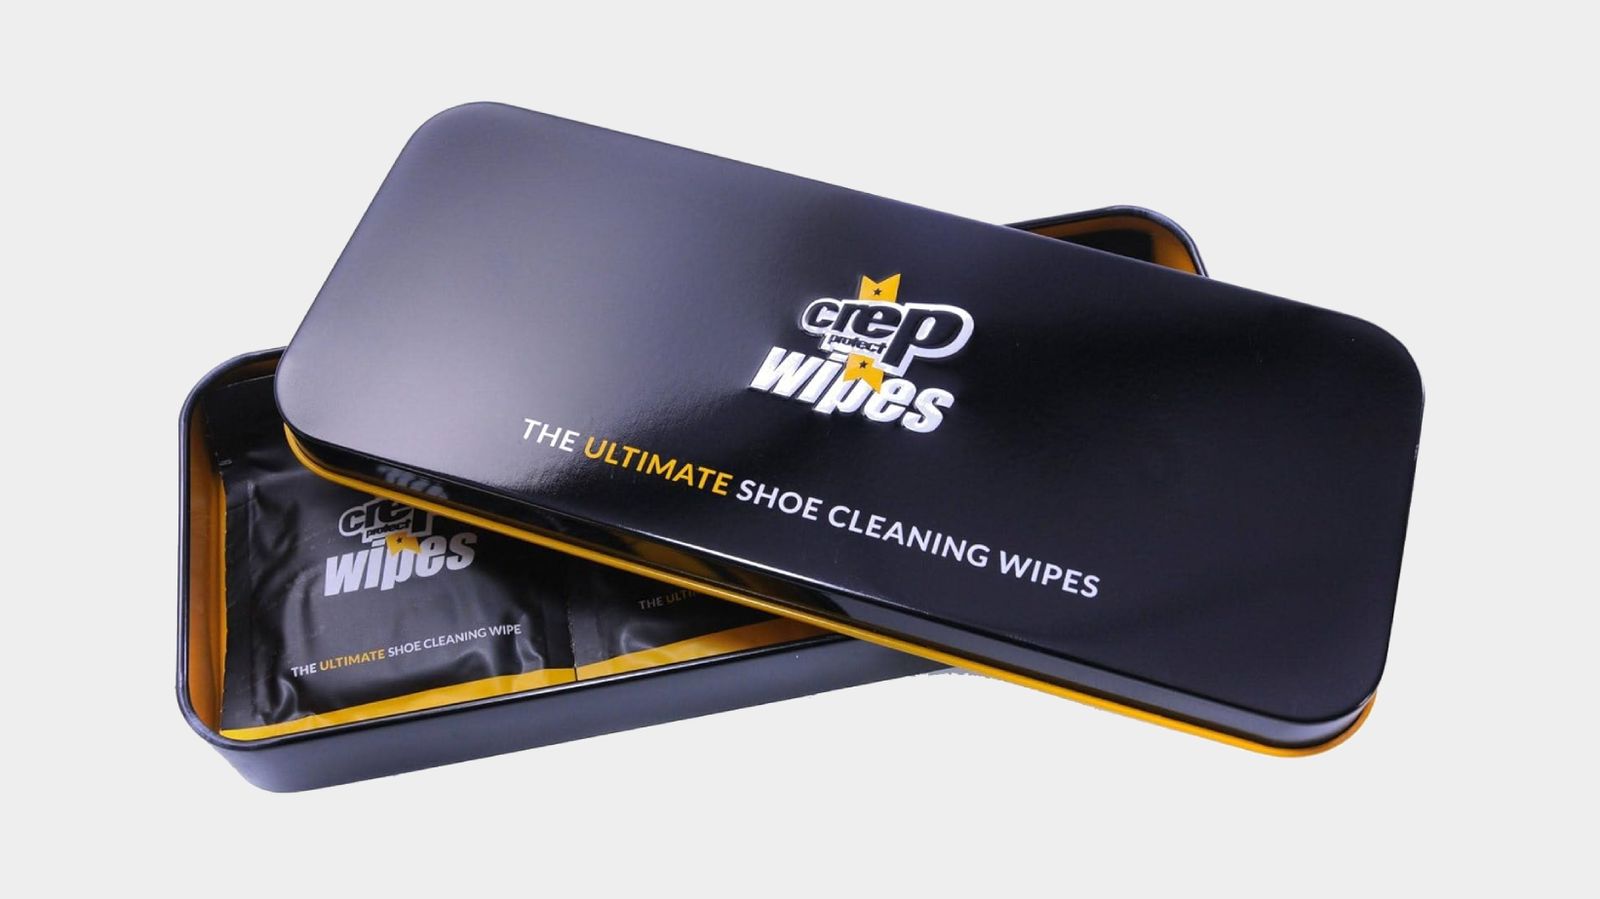 Crep Protect Shoe Cleaning Wipes product image of a black box with yellow trim of cleaning wipe packets.